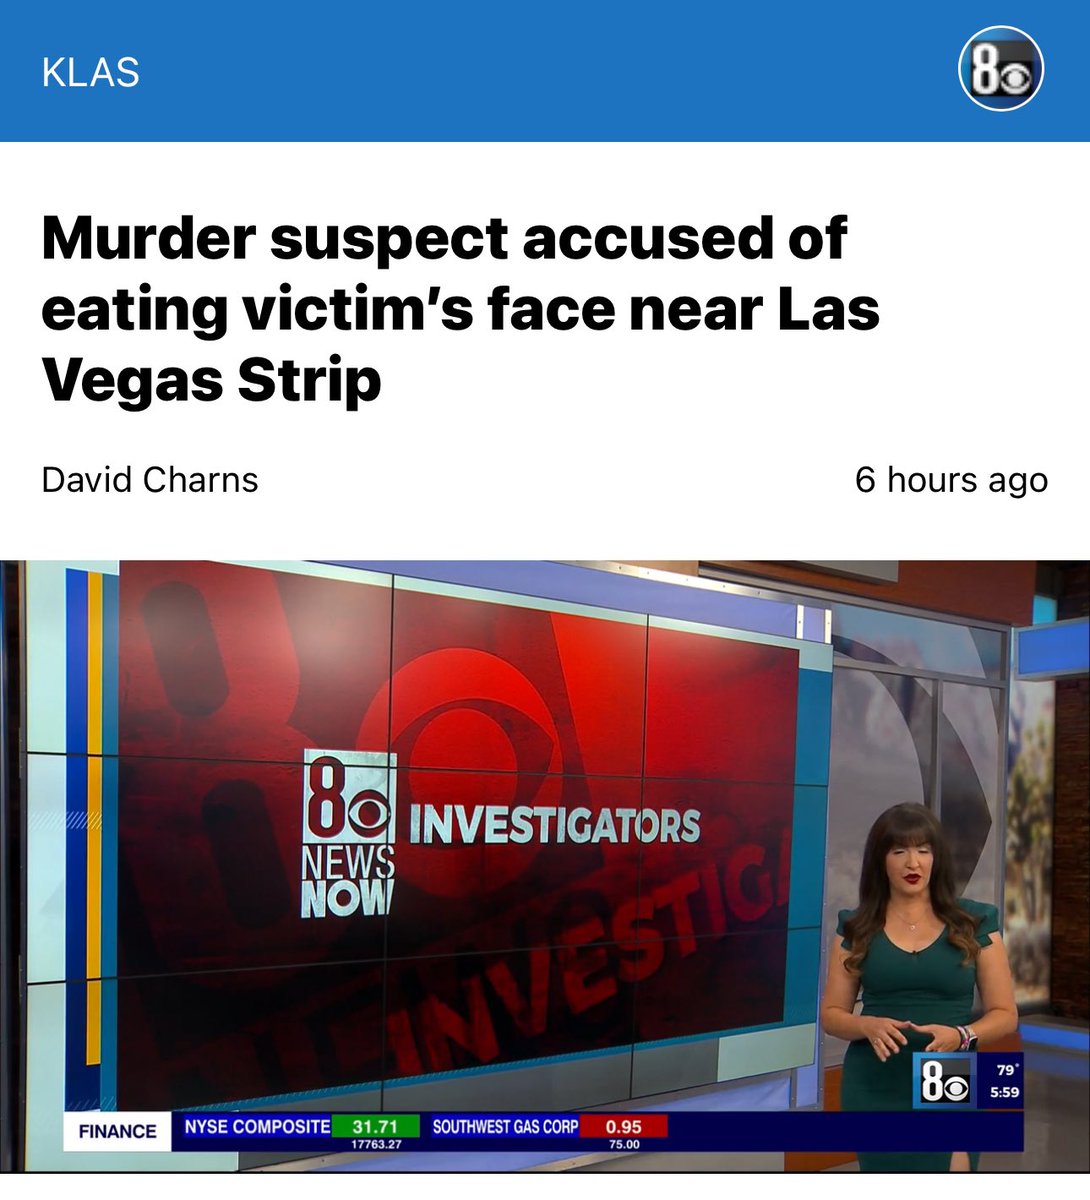 LAS VEGAS (KLAS) — A man allegedly murdered another man at a bus stop near the Las Vegas Strip, eating his victim’s face in the process, according to documents the 8 News Now Investigators obtained. Colin Czech, 29, faces a charge of open murder. 8newsnow.com/investigators/…